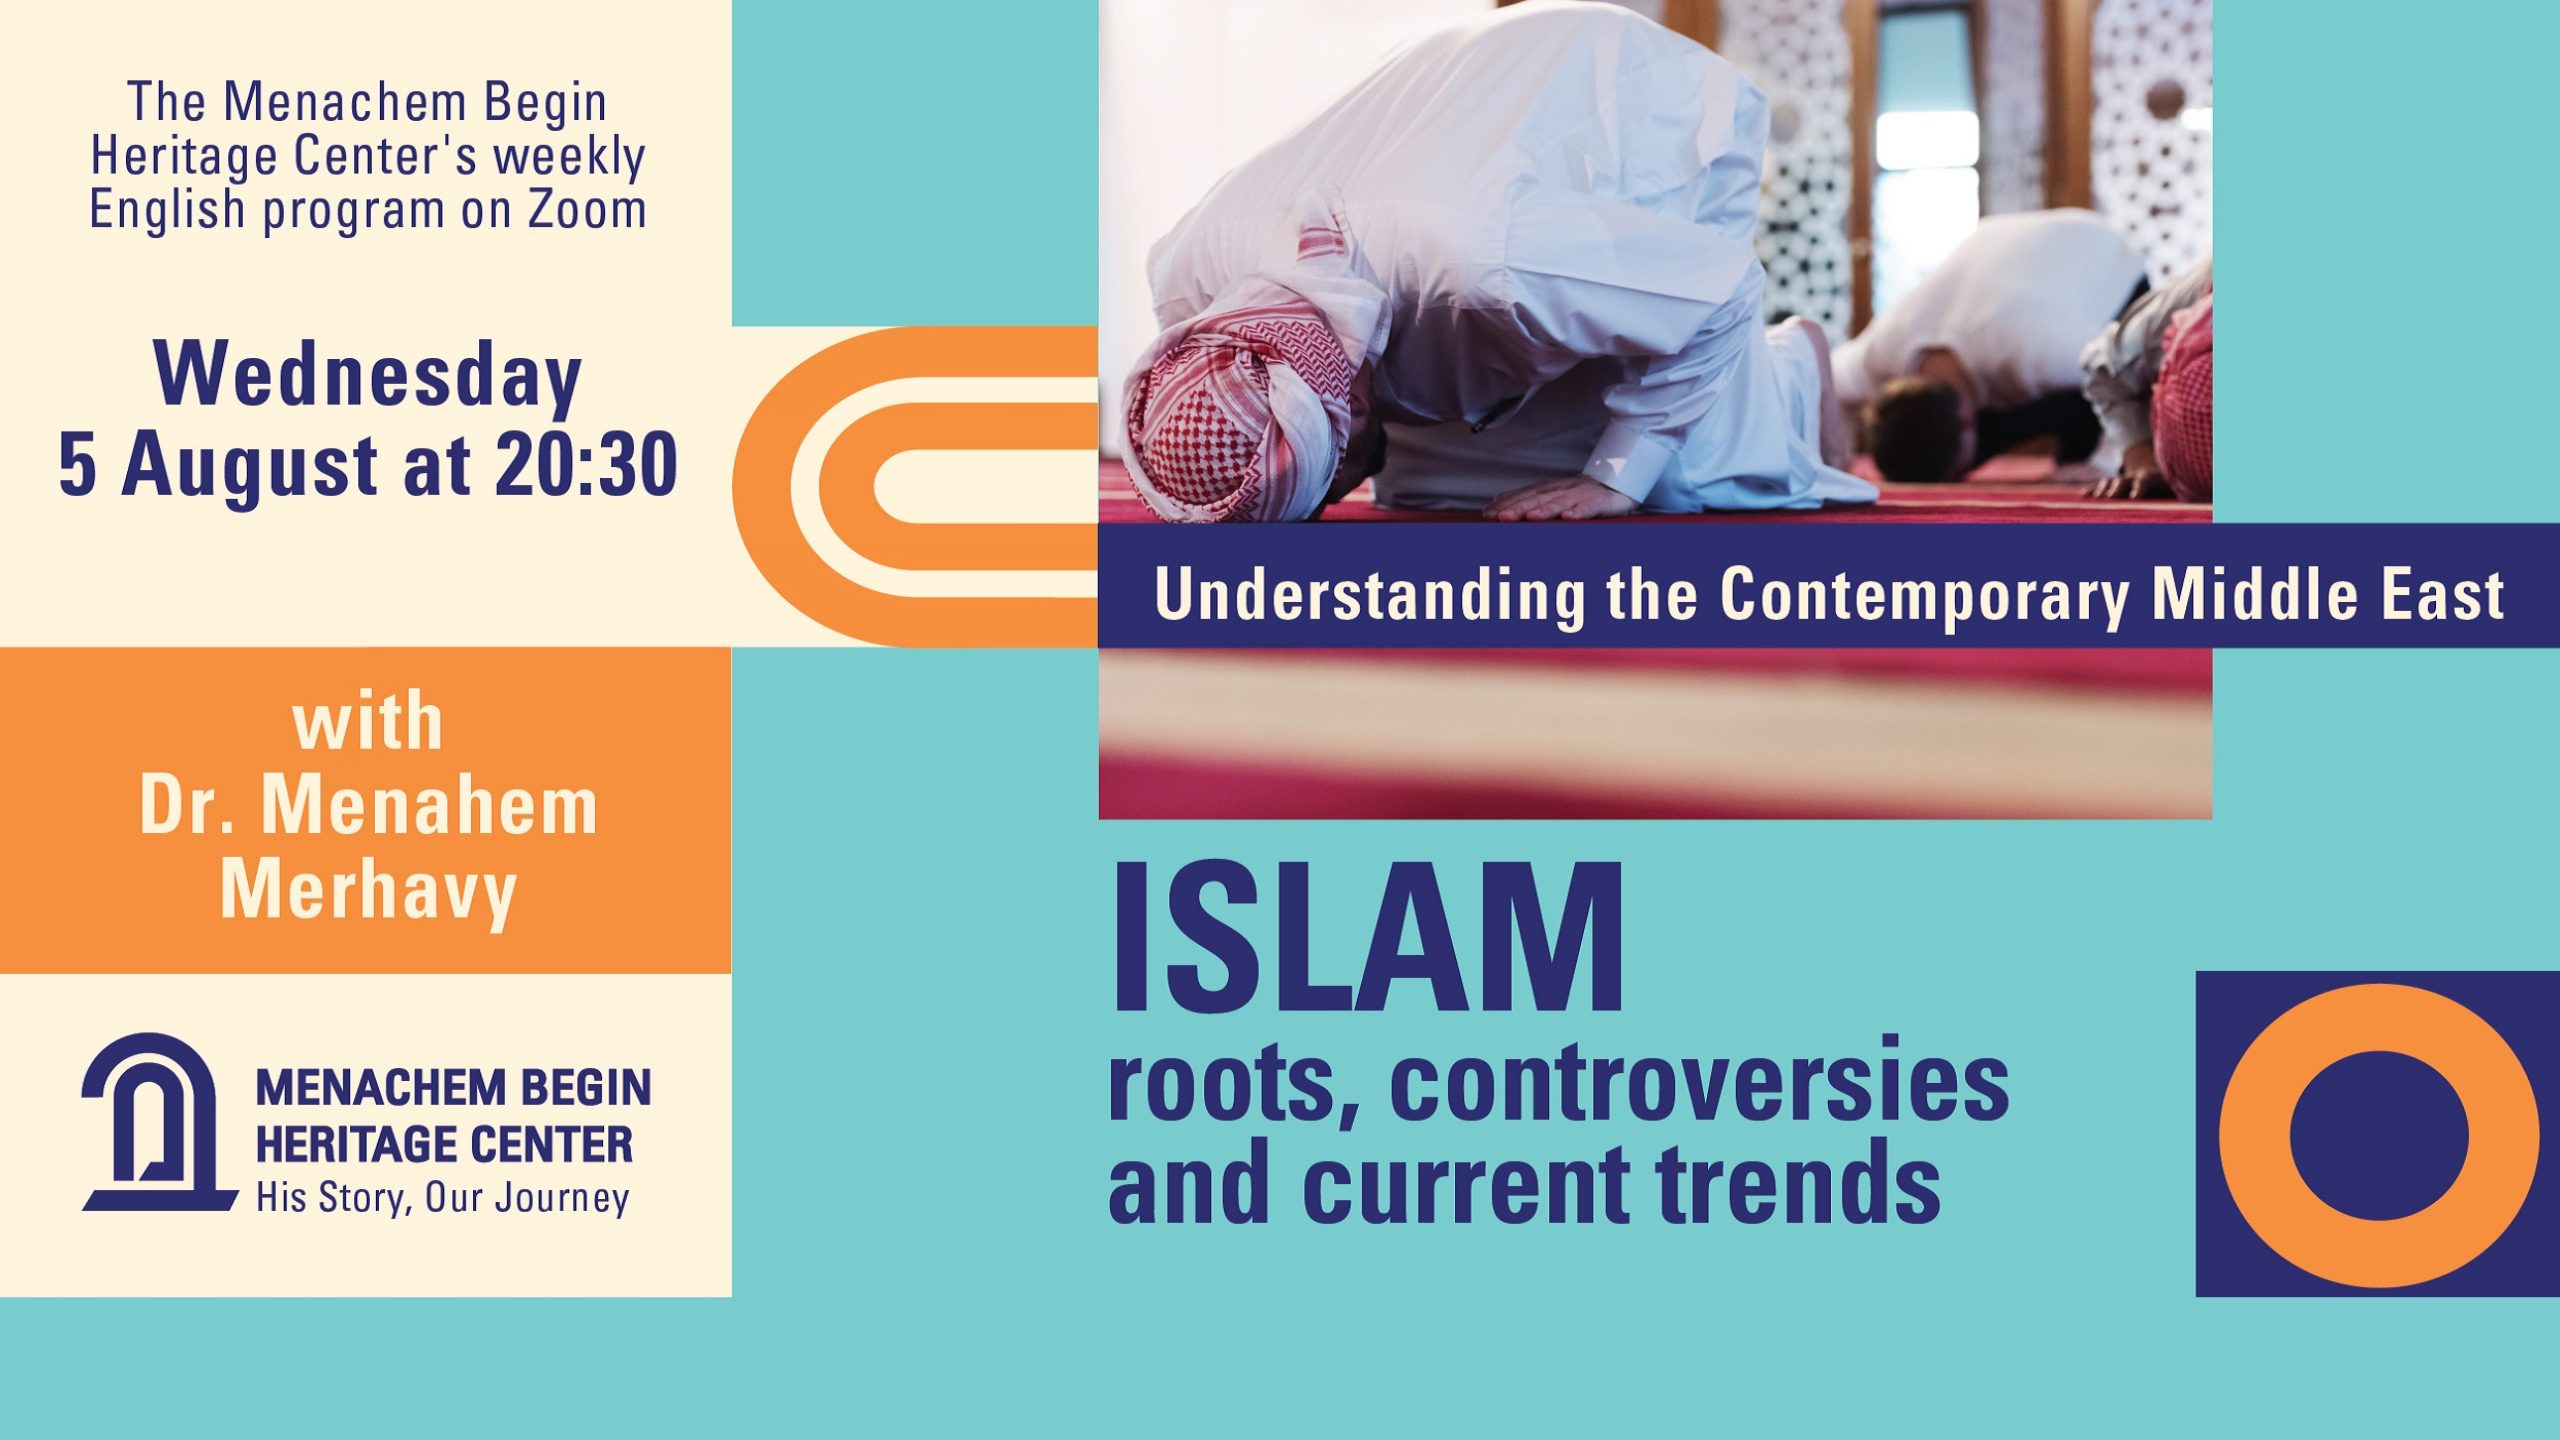 Islam: Roots, Controversies and Current Trends